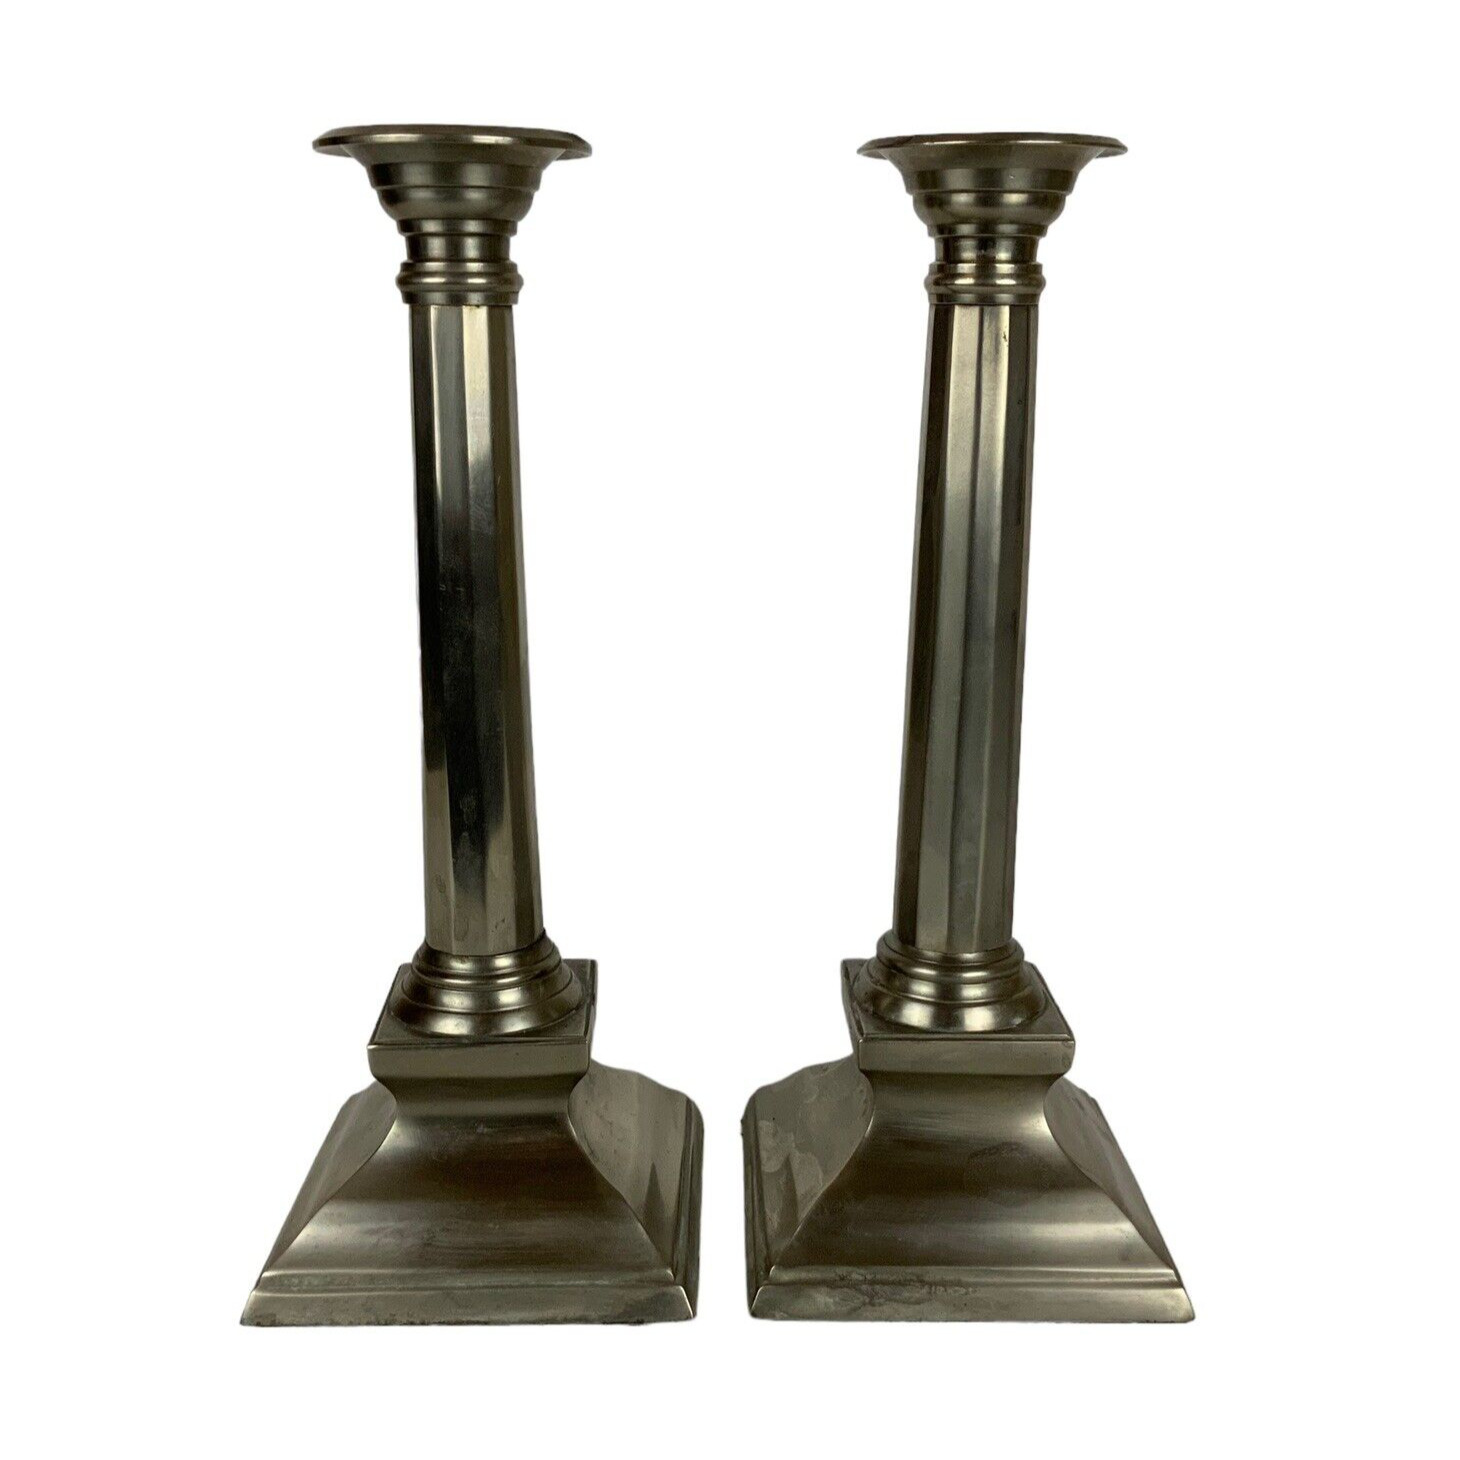 Brushed Nickel Pewter Candlesticks Taper Candle Holders Square Base Traditional